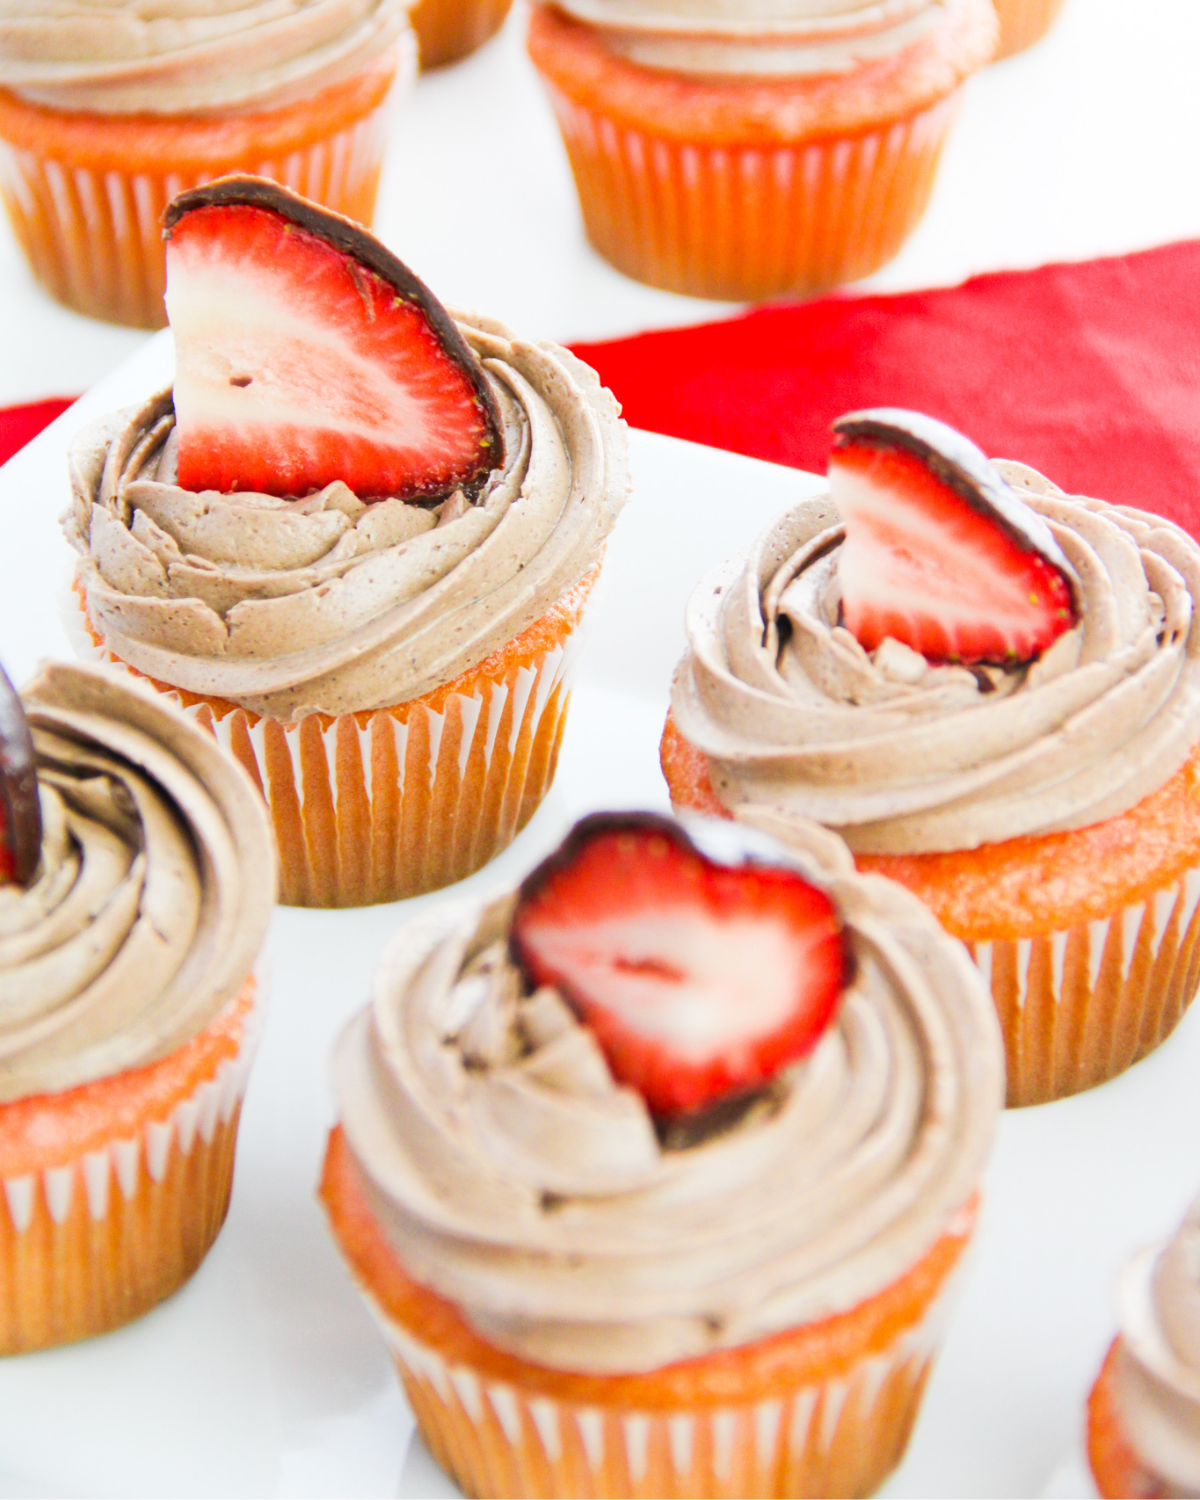 strawberry chocolate cupcakes on a white plate